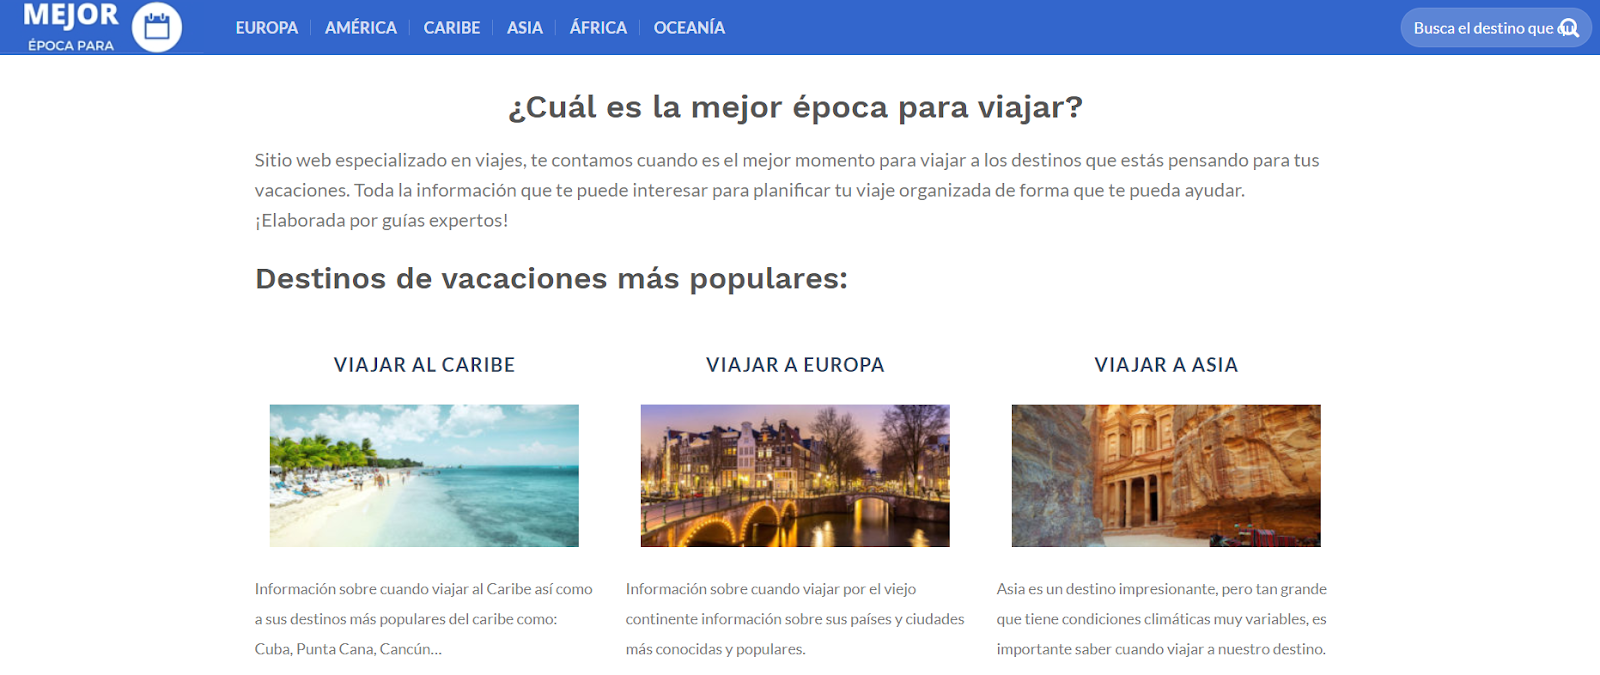 A screenshot of the Mejor Epoca Para travel blog featuring different content categories